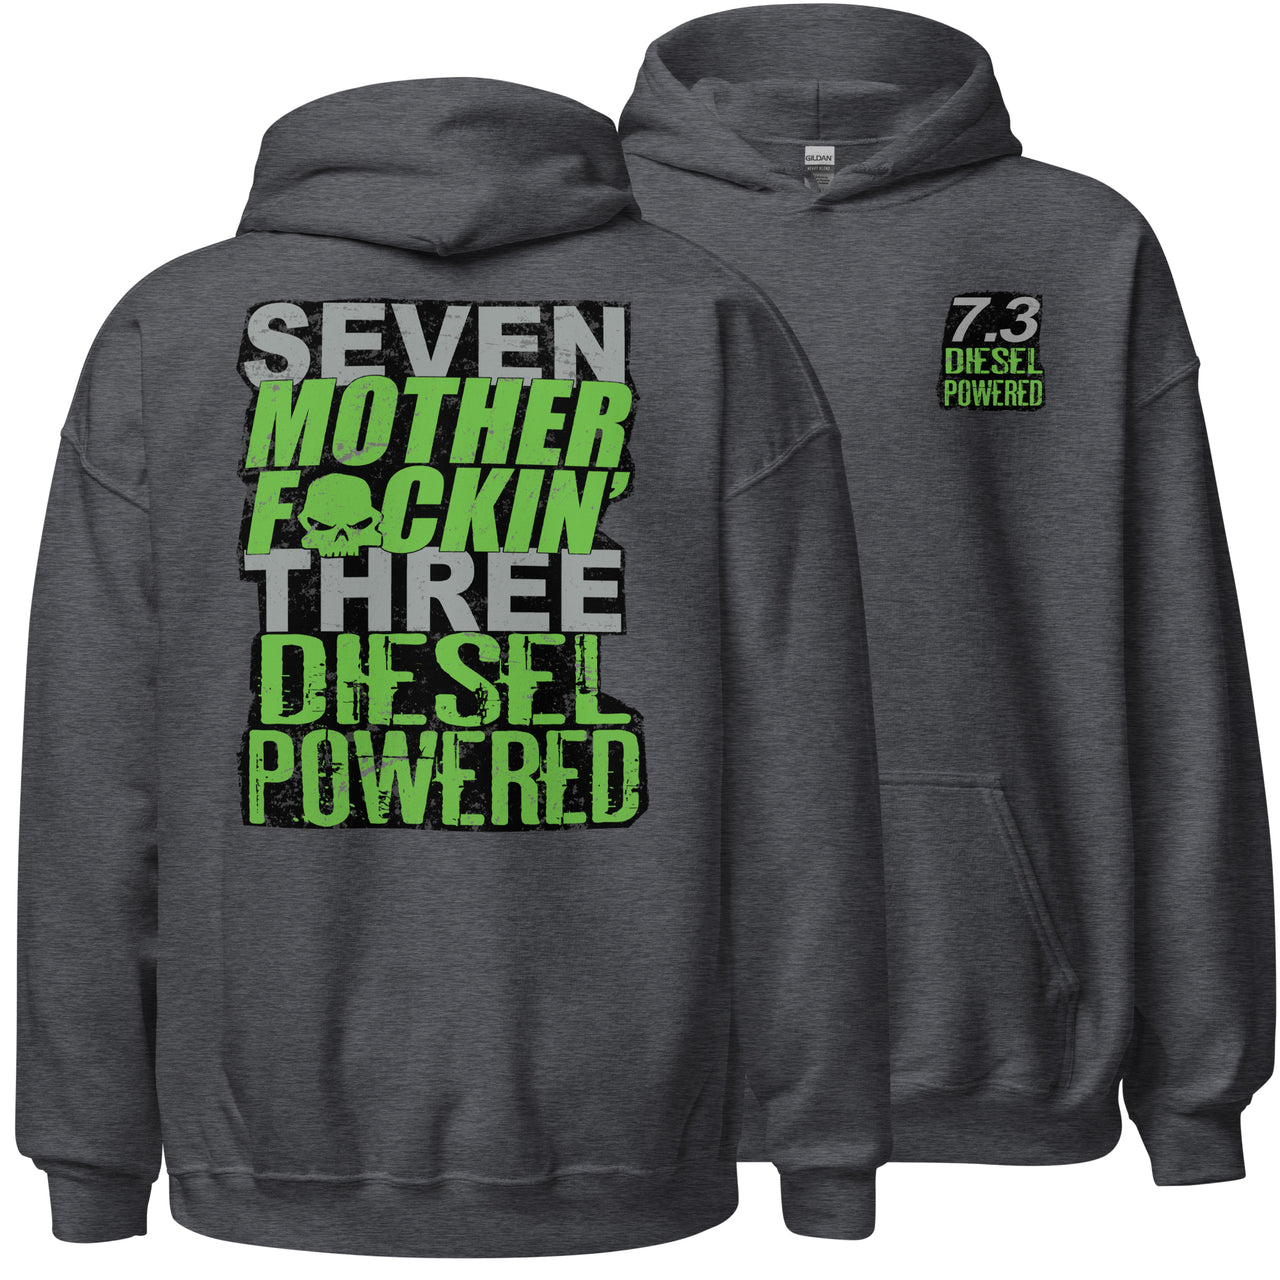 7.3 Power Stroke Hoodie From Aggressive Thread - grey